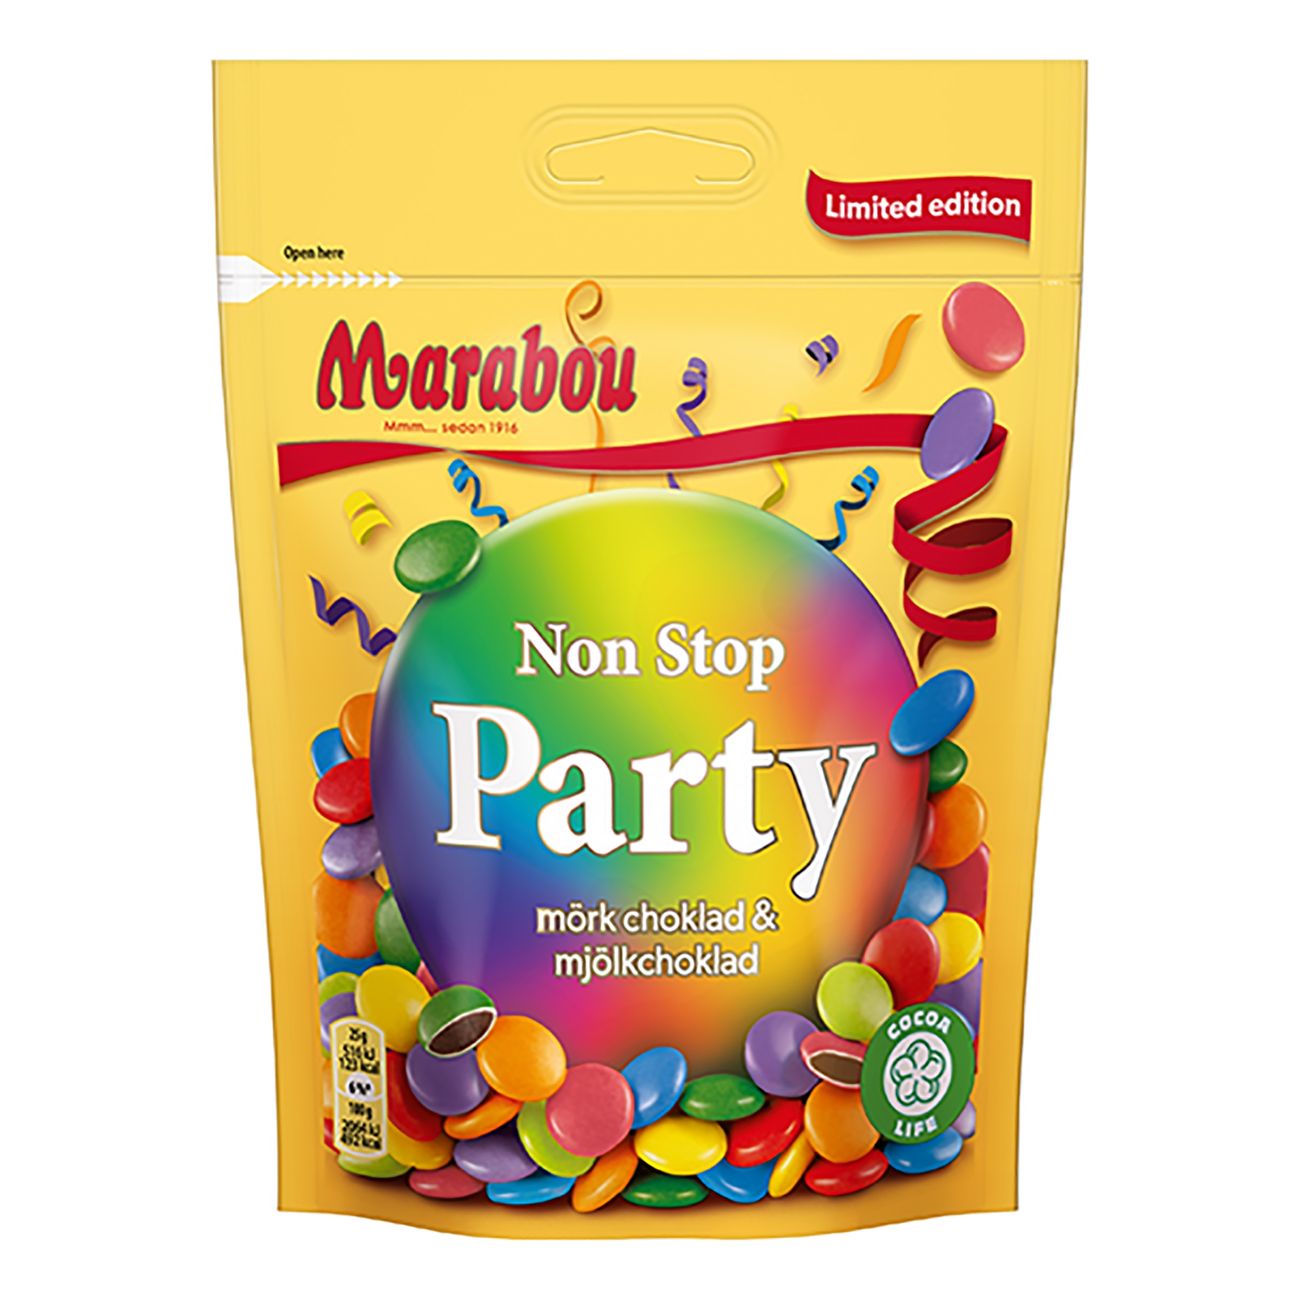 nonstop-party-limited-225gr-92766-1